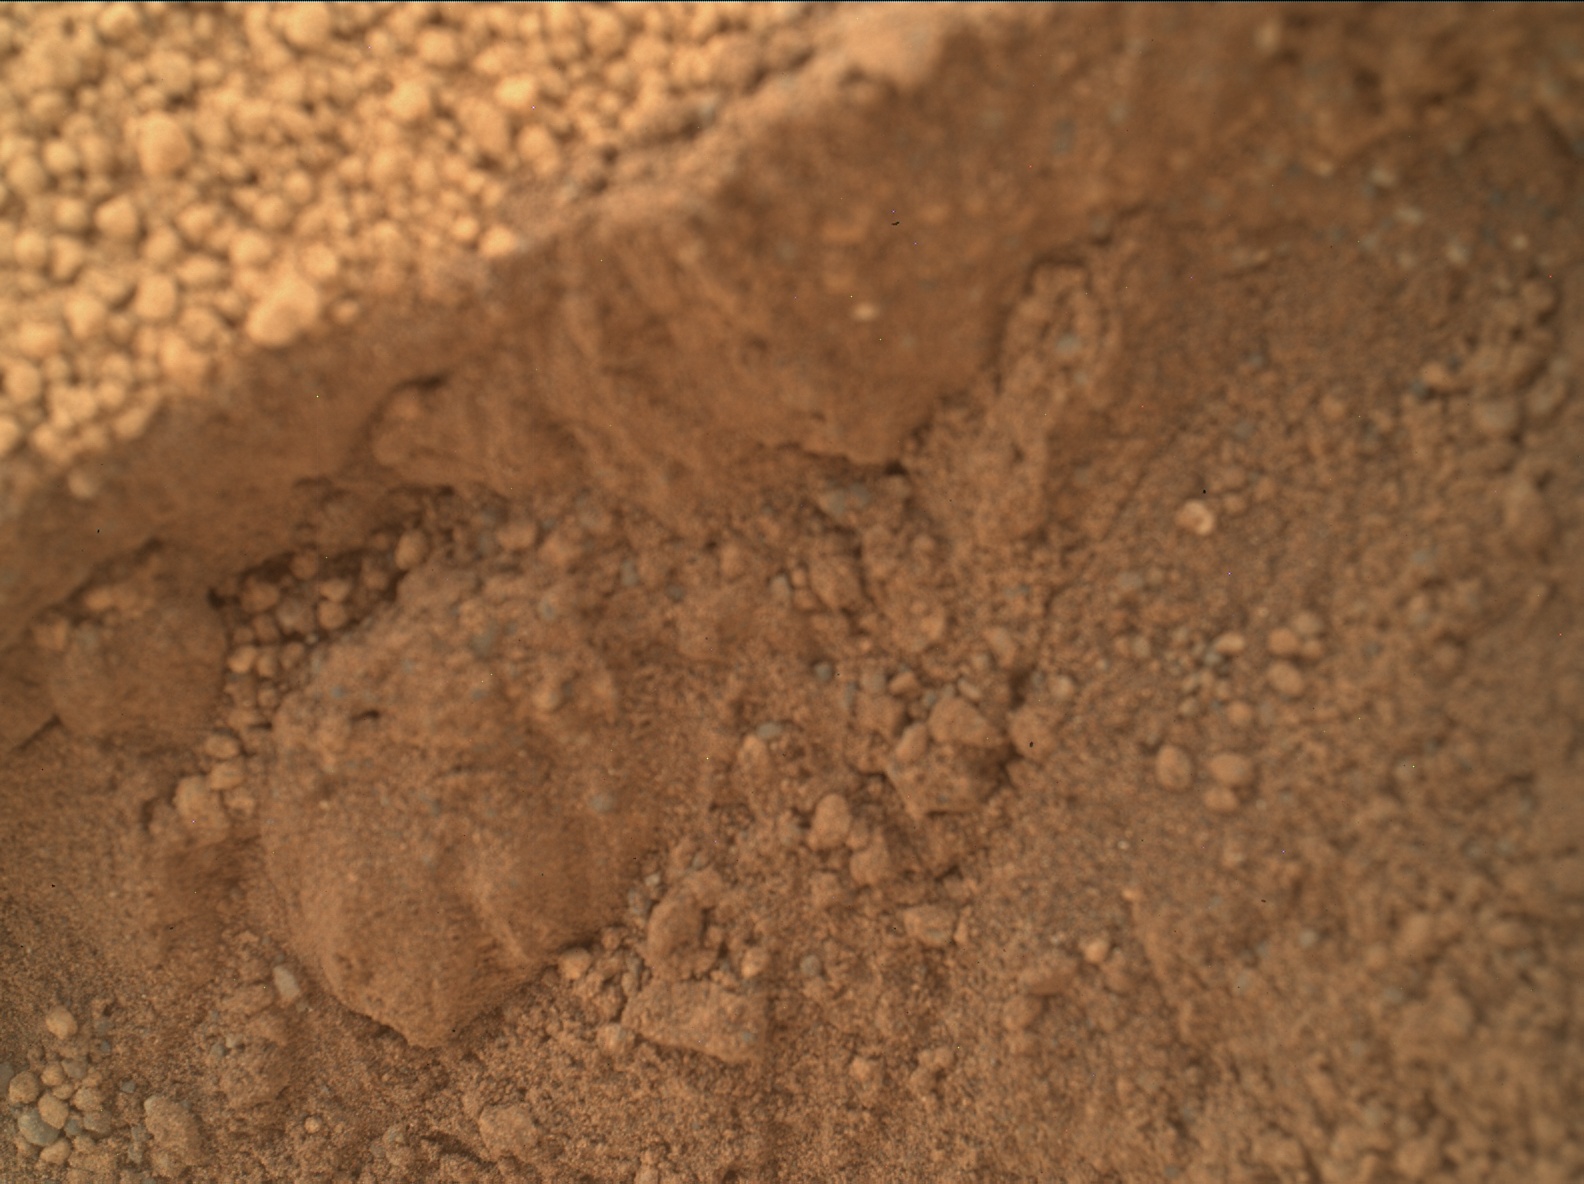 Nasa's Mars rover Curiosity acquired this image using its Mars Hand Lens Imager (MAHLI) on Sol 67